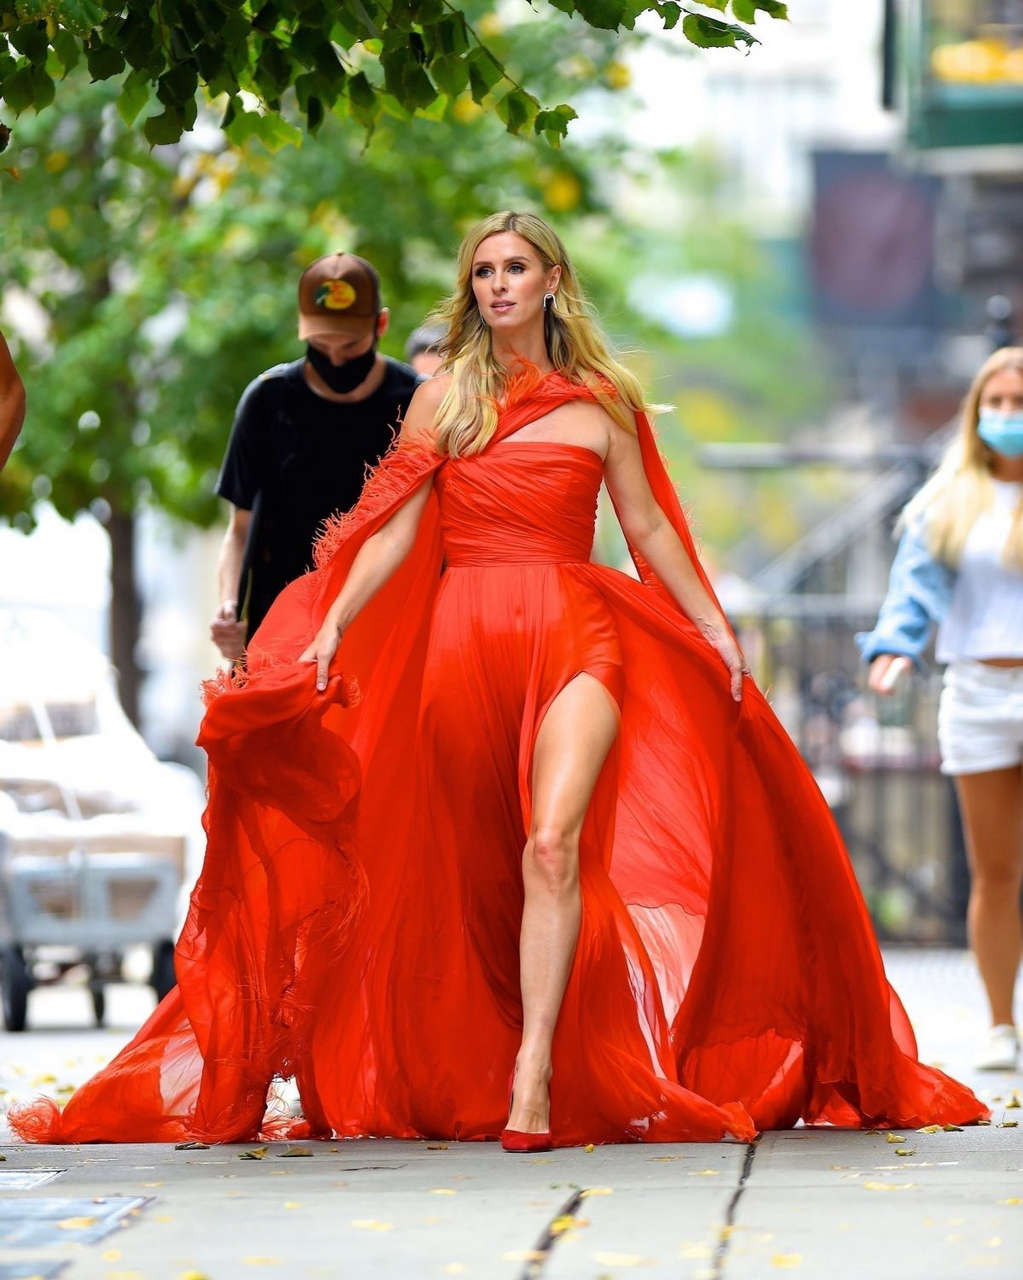 Nicky Hilton All Red Photoshoot New York